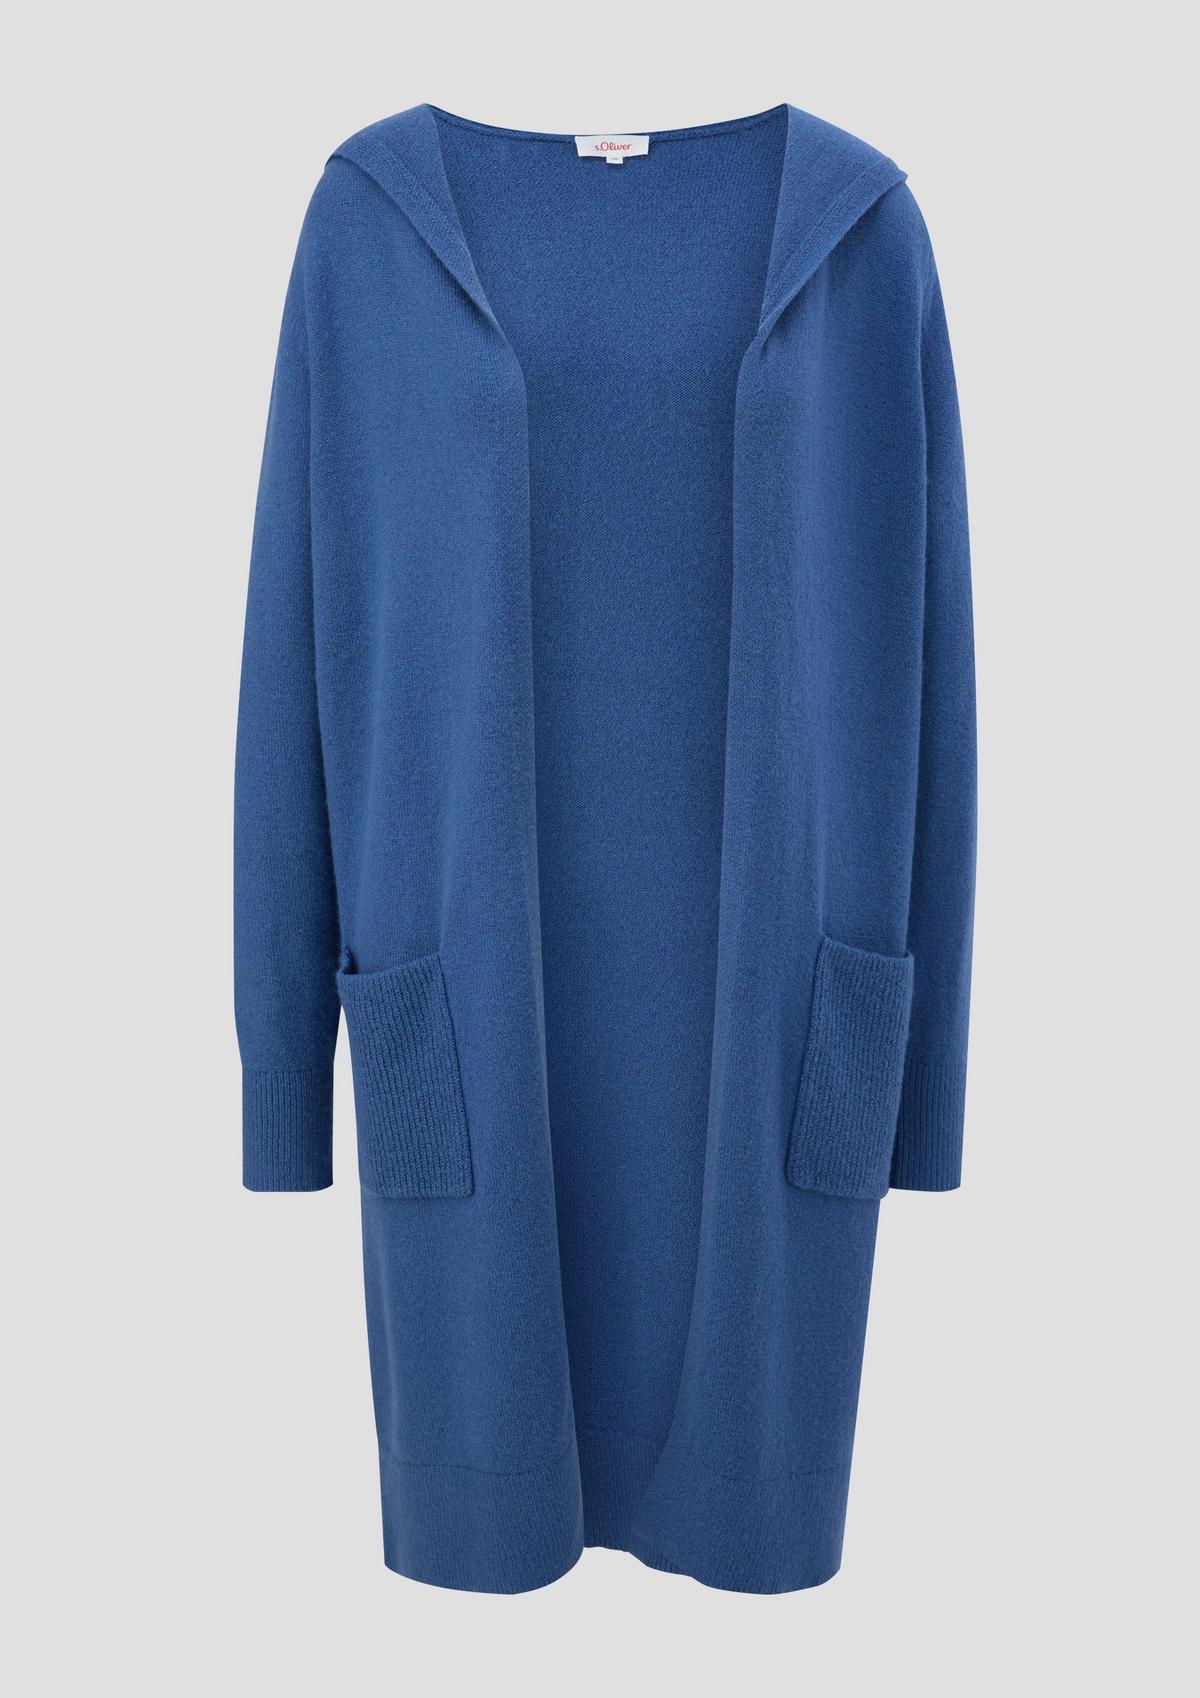 hood long a cardigan with blue - Open